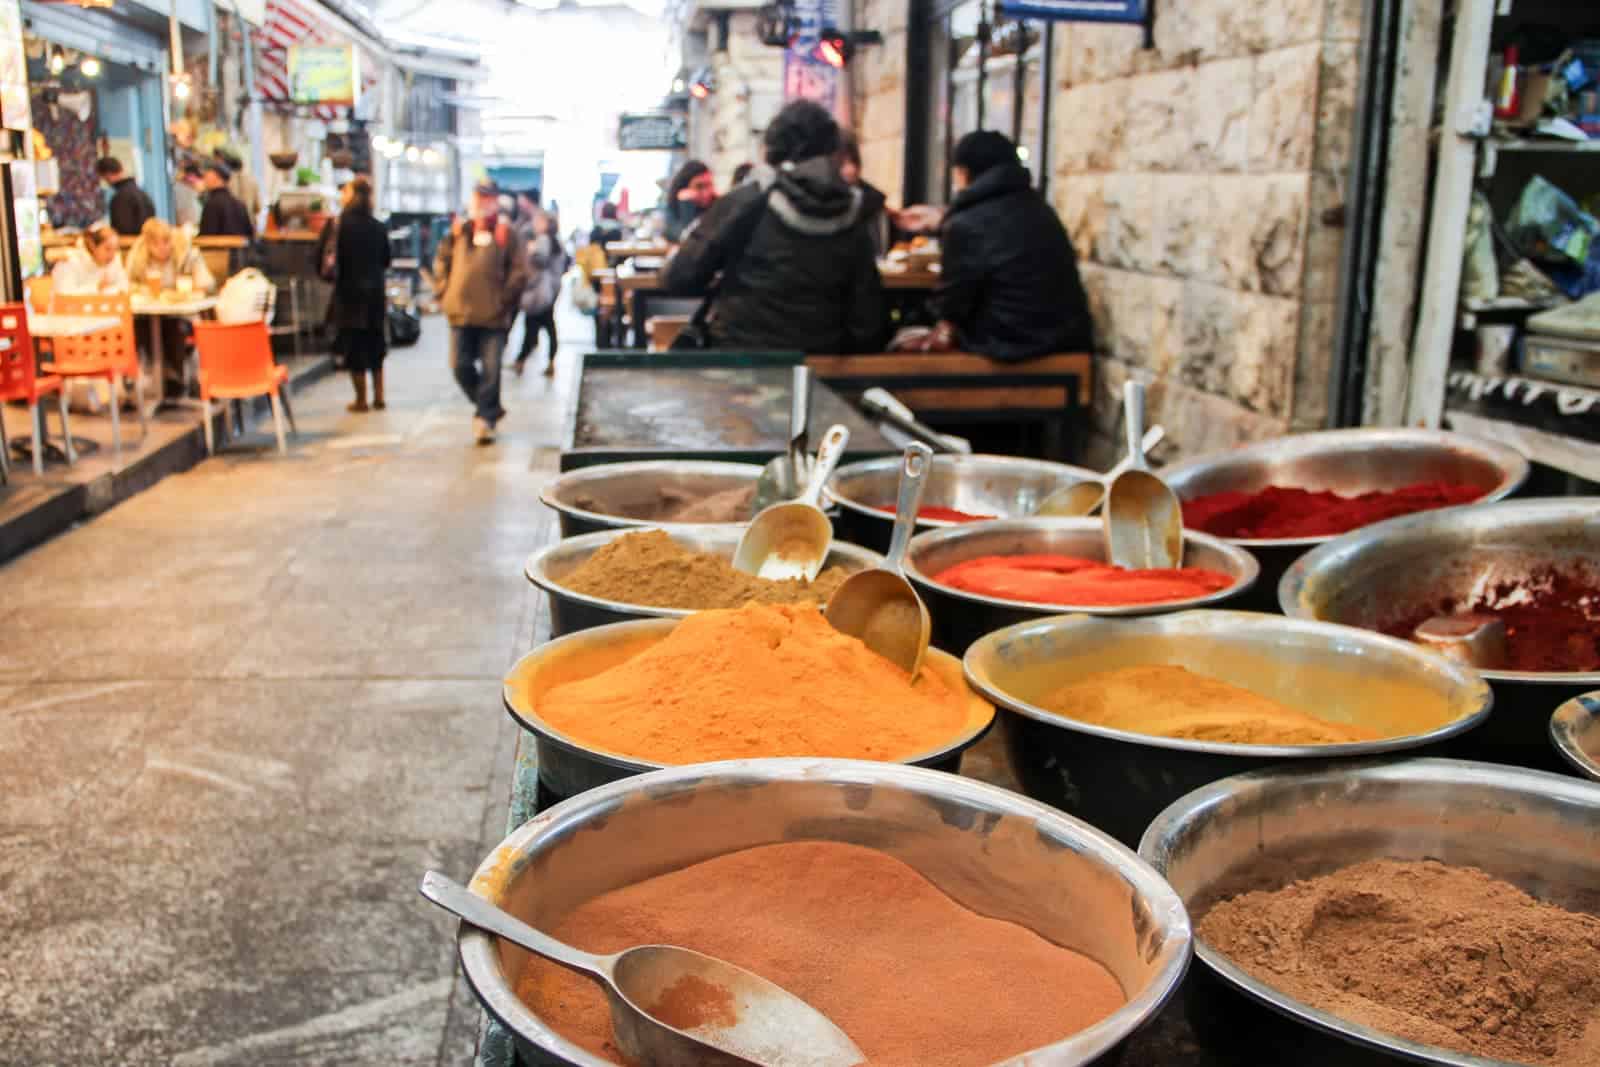 10 metals bowls containing a variety of spices in hues of yellow, orange, red and brown at Mahaneh Yehuda Market in Jerusalem. A group of people are sitting at a table in the background. 